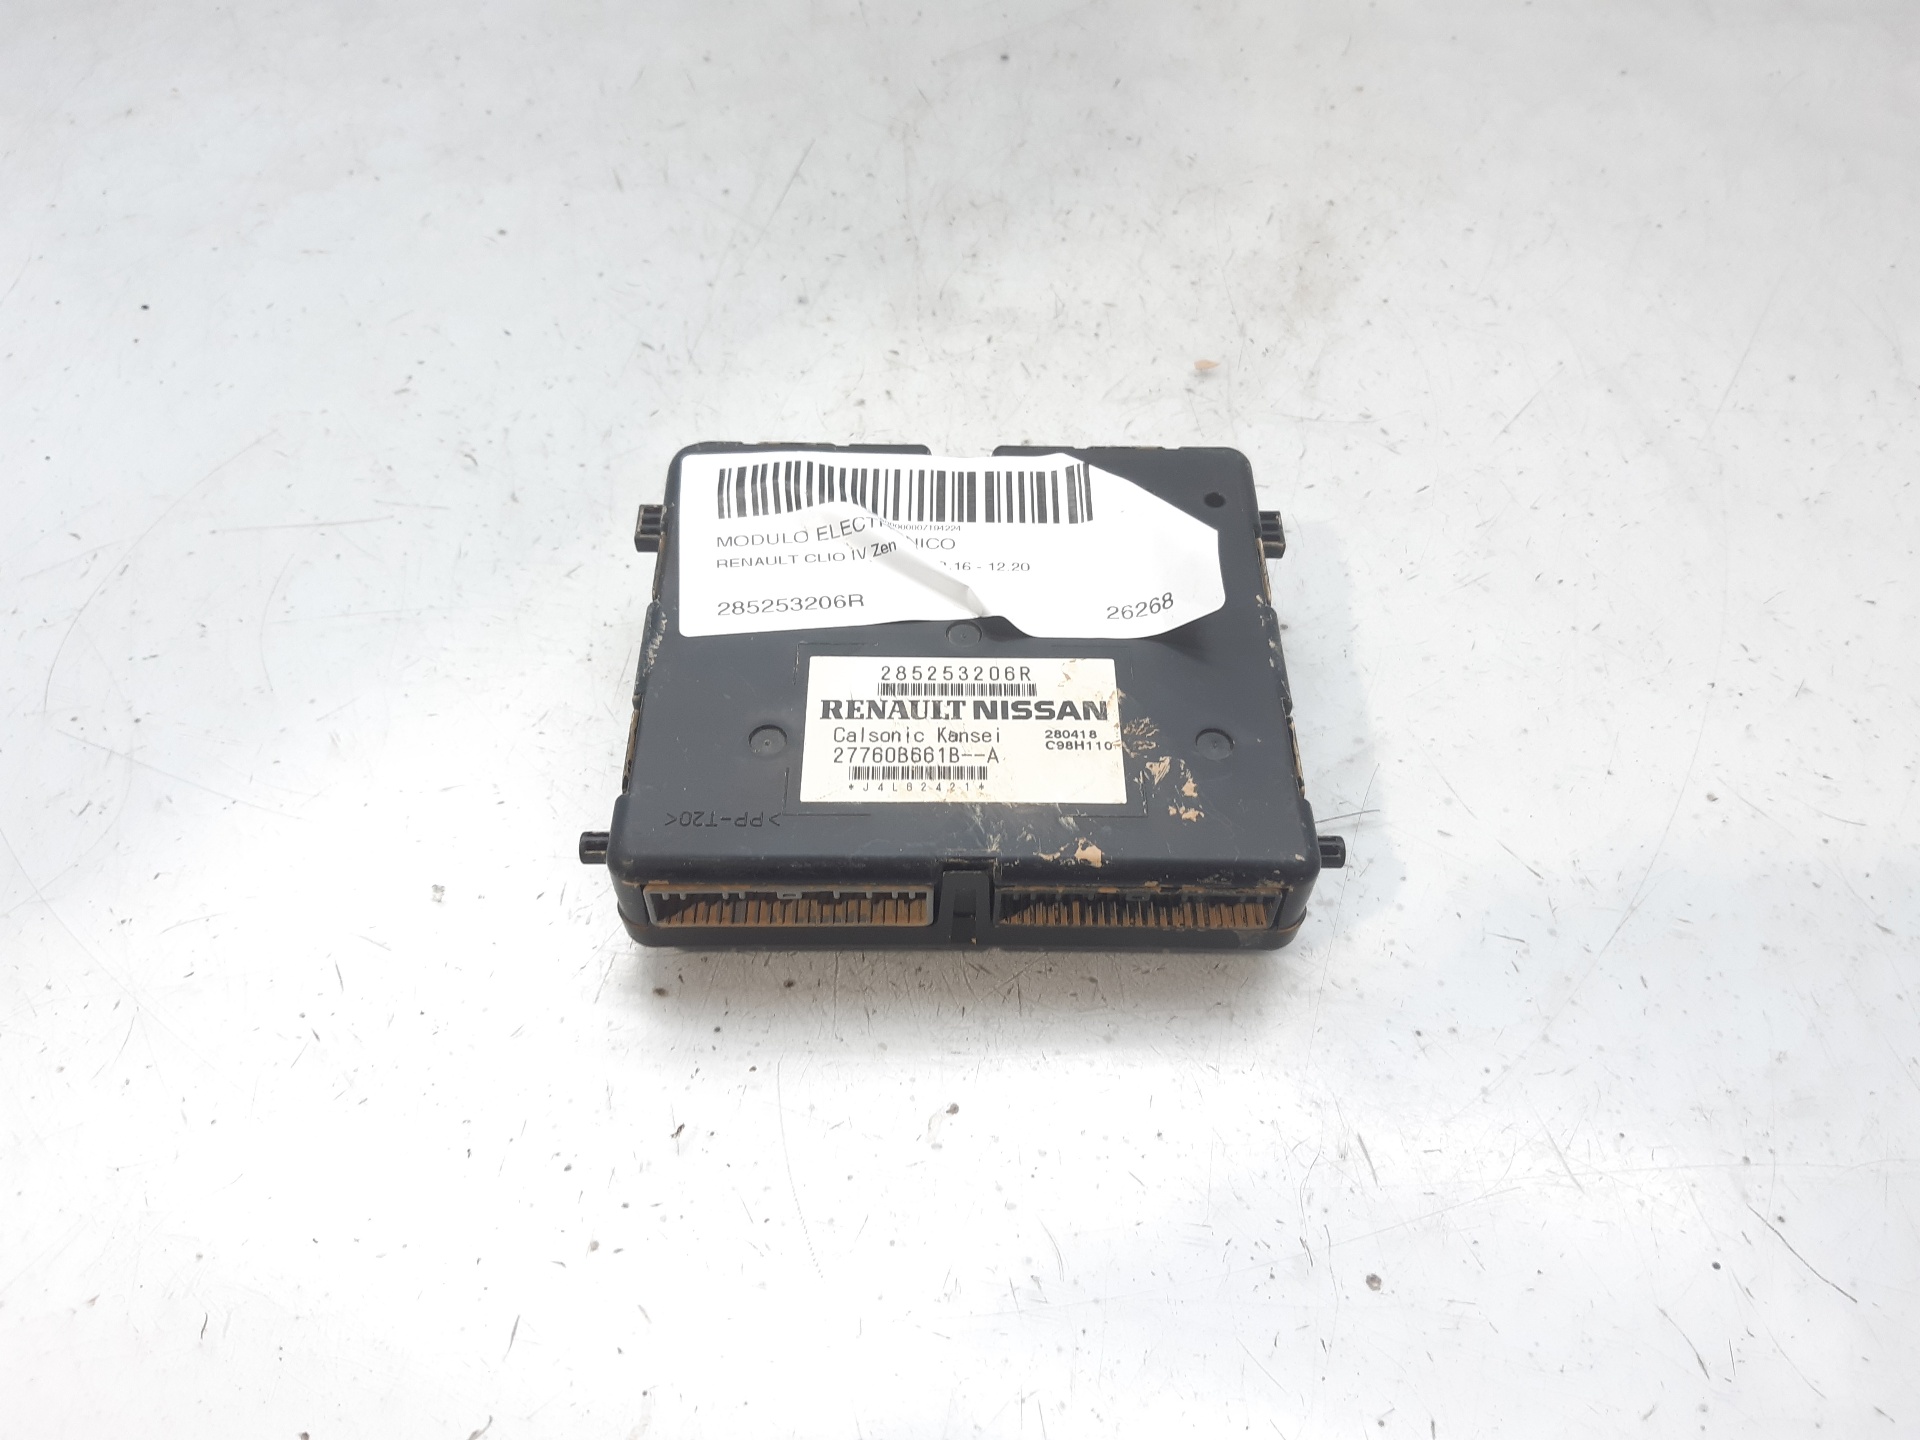 RENAULT Clio 3 generation (2005-2012) Other Control Units 285253206R 22305032